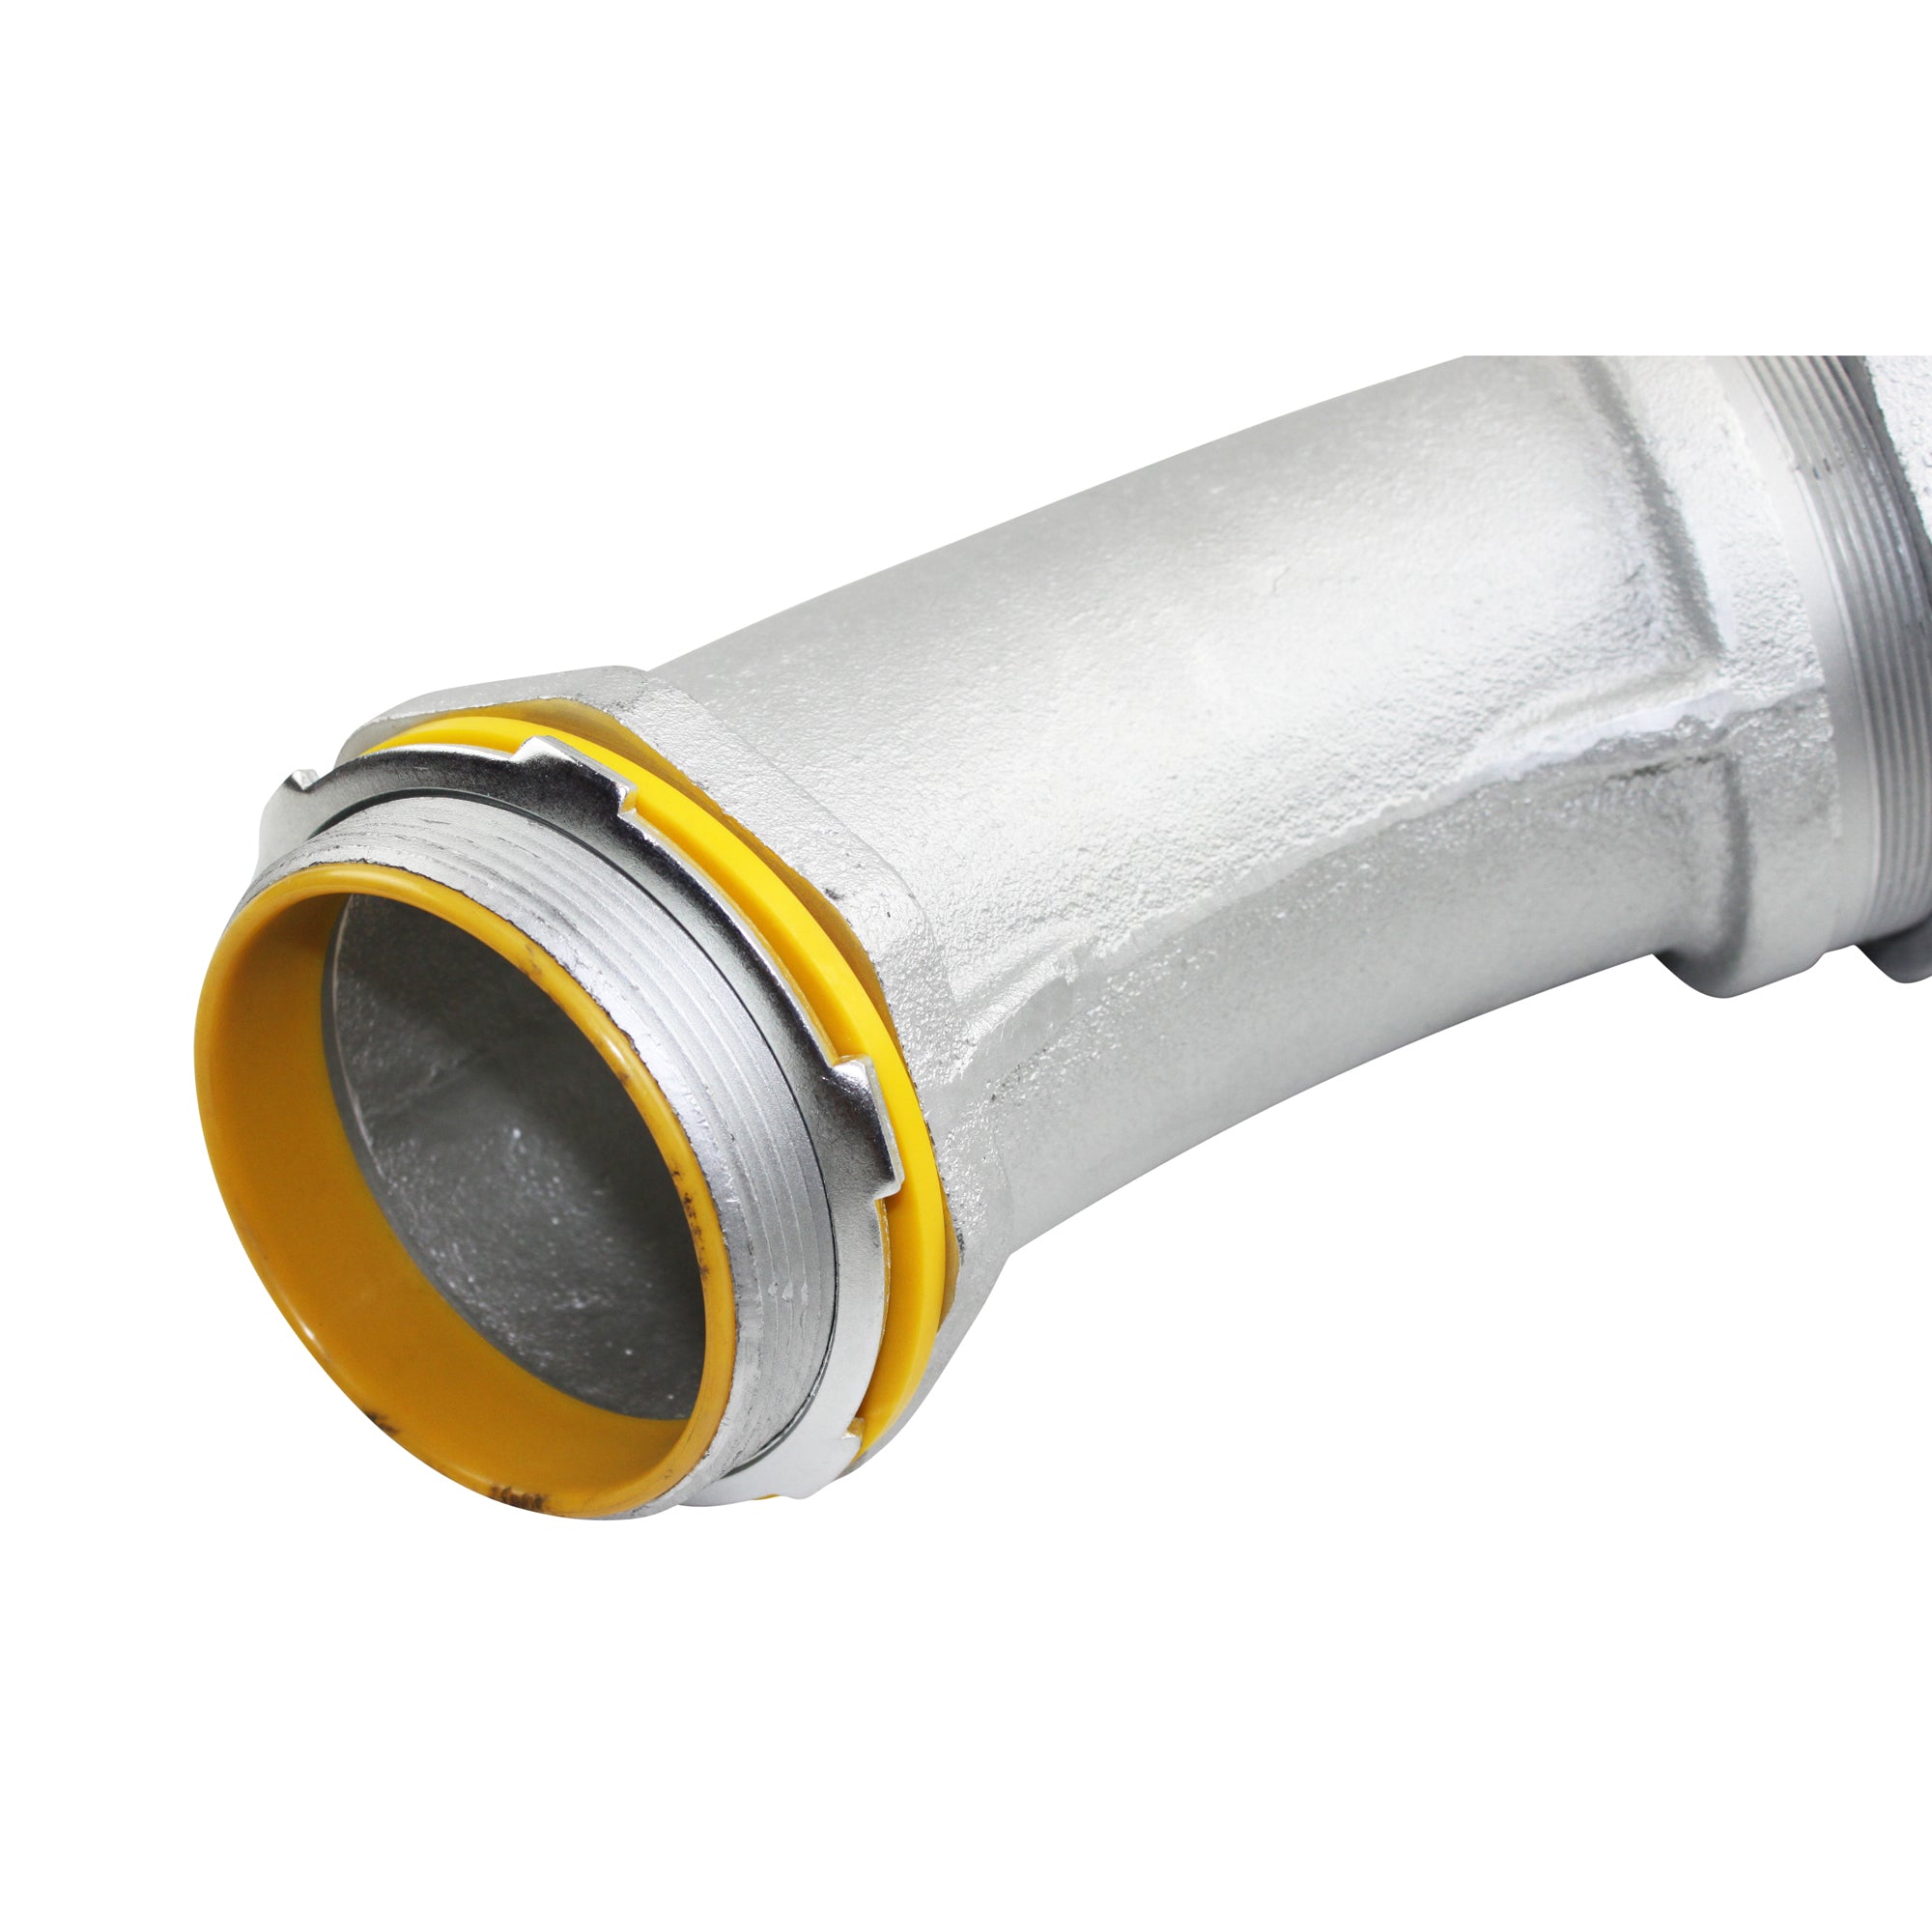 Crouse Hinds, CROUSE HINDS LTB40045GC 4" LIQUIDTIGHT 45 DEGREE CONNECTOR 3/0 CU INS. THROAT